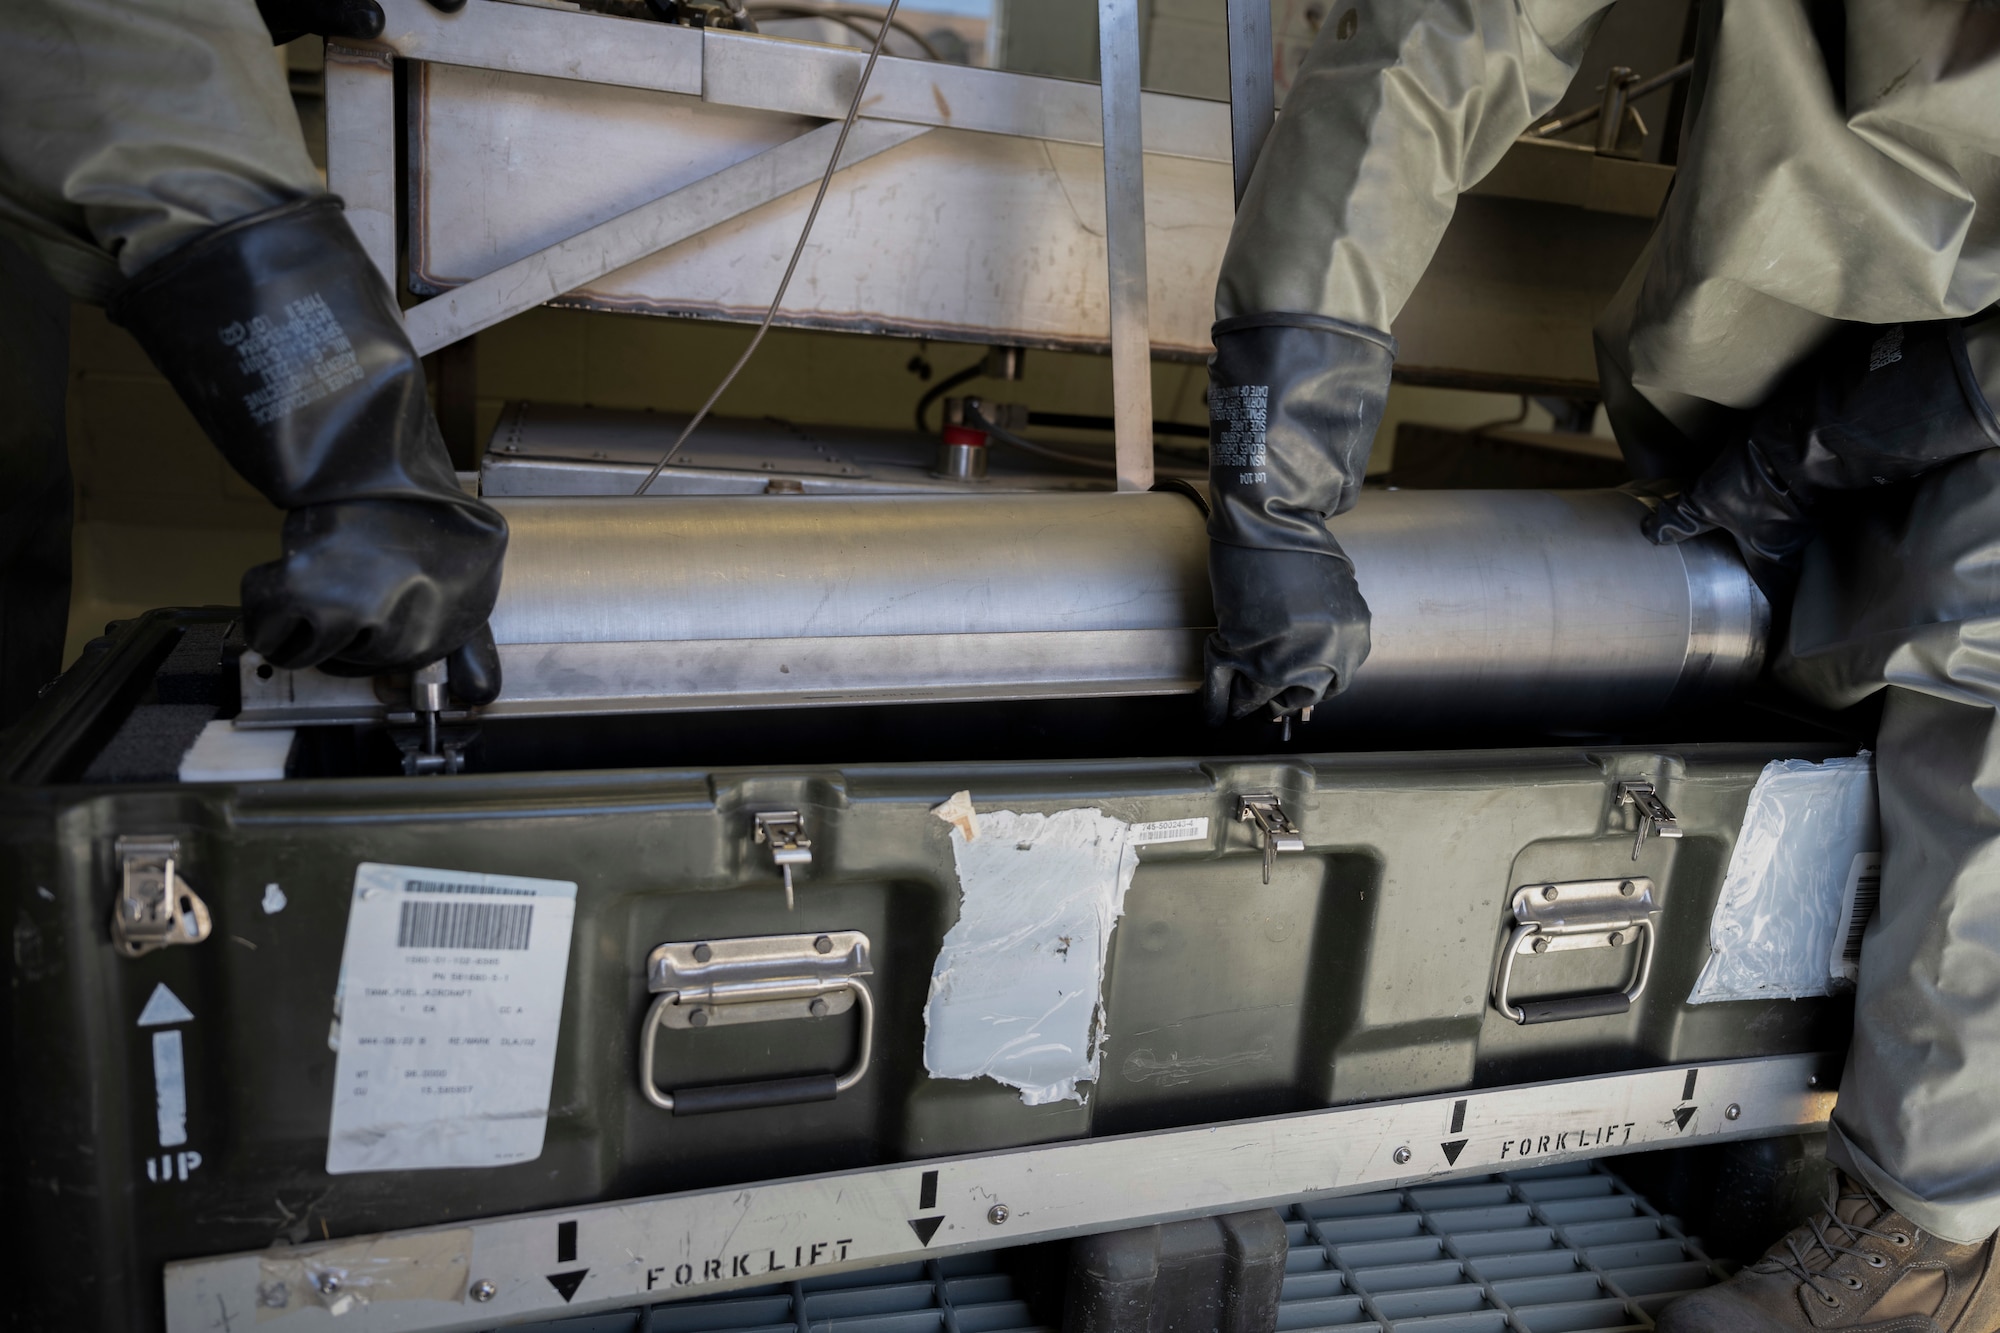 Airmen from 49th Component Maintenance Squadron transport a container of hydrazine at Holloman Air Force Base, New Mexico, April 18, 2023. The handling of hydrazine requires specialized vehicles and strict handling procedures to transport fuel for the F-16 jets to carry out training missions. (U.S. Air Force photo by Airman 1st Class Michelle Ferrari)